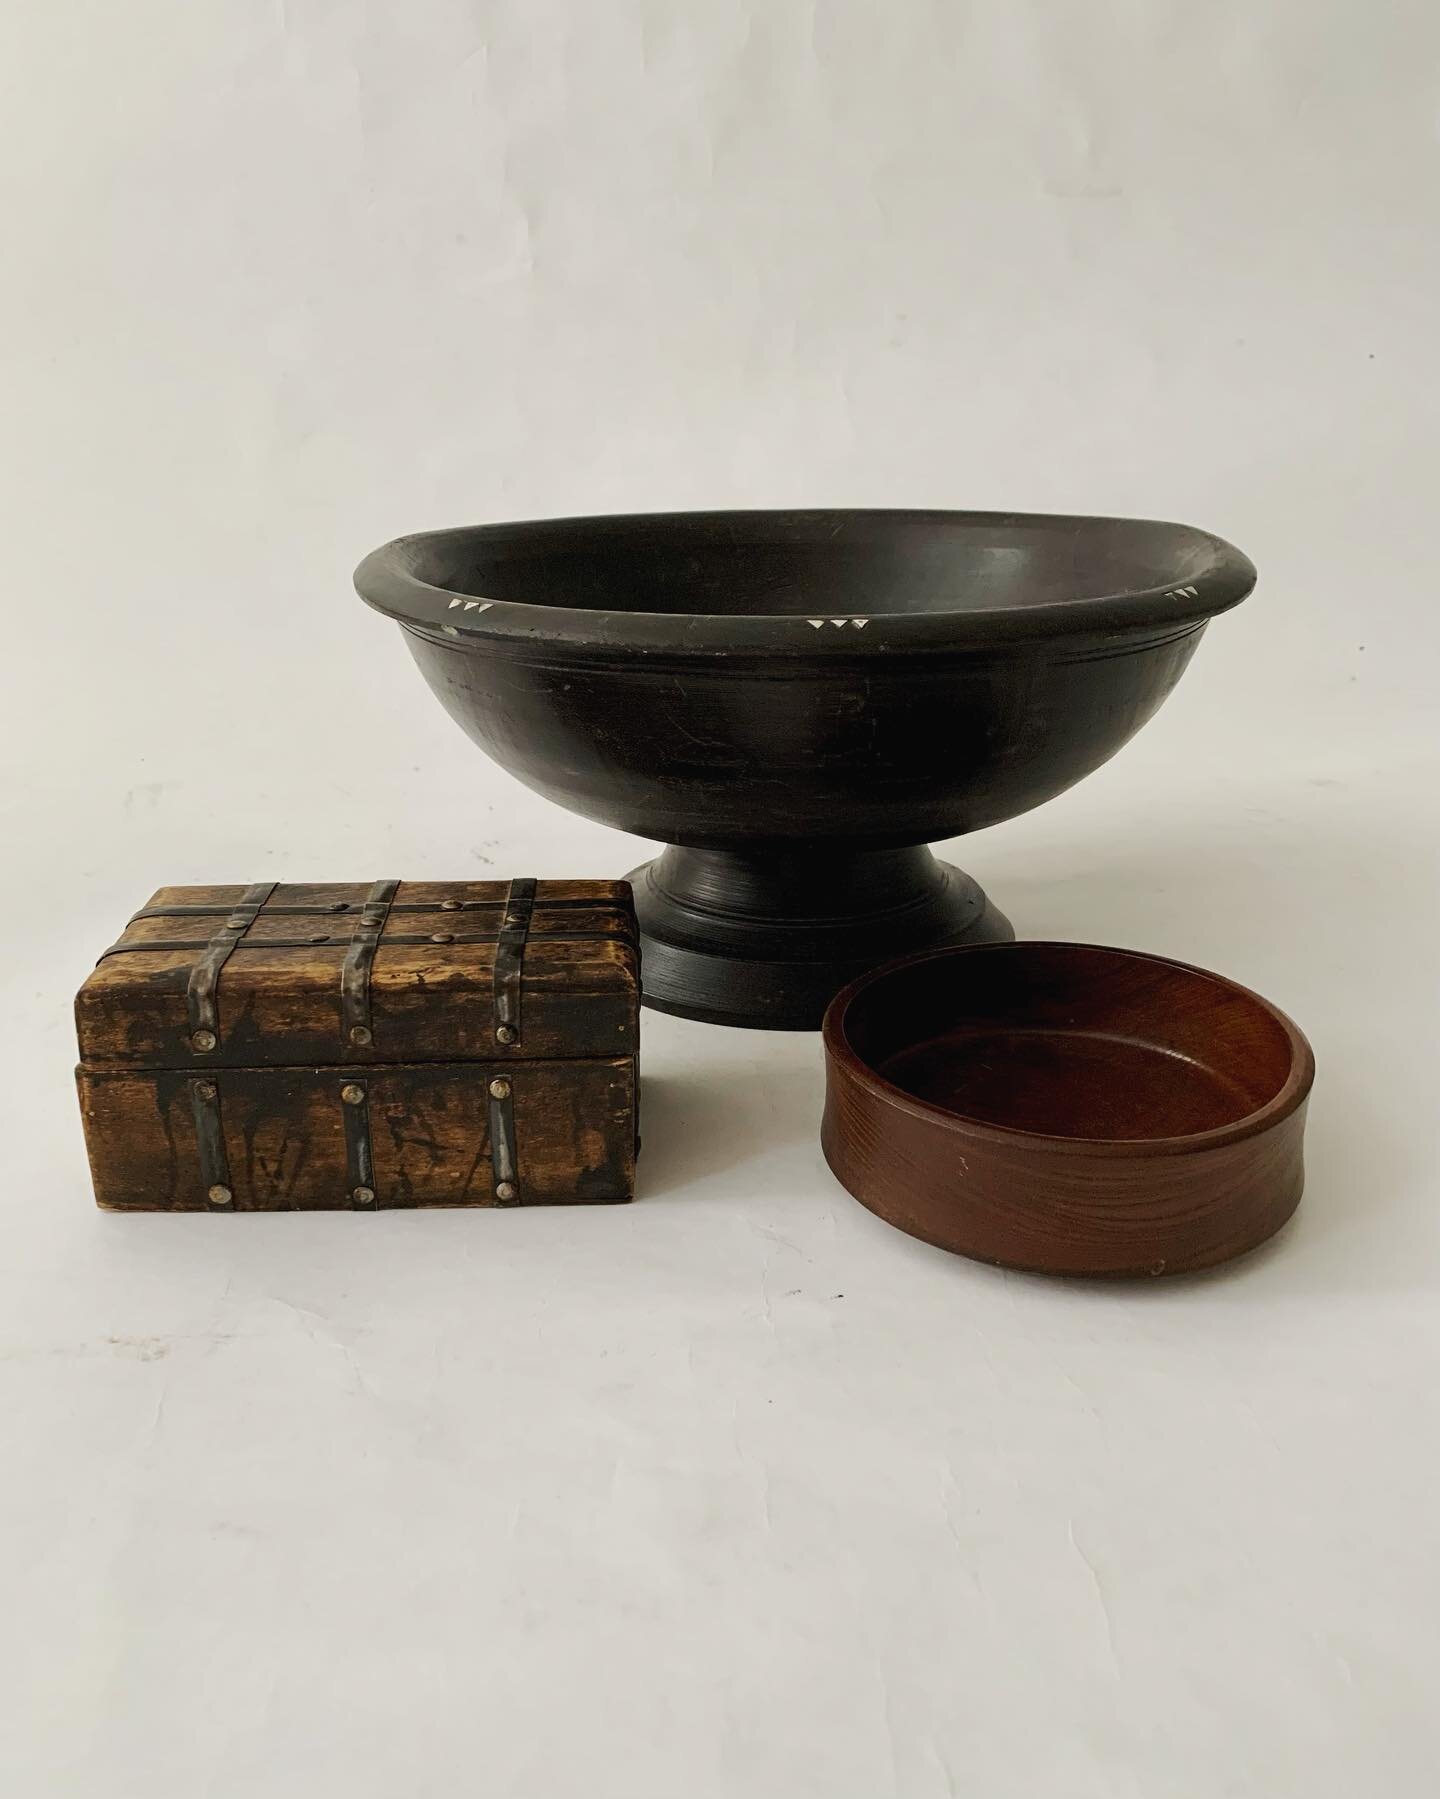 Today&rsquo;s trio, a primitive wood and metal strap trinkets box 3.5x7x3&rdquo;H $38.00, a good size footed primitive wooden bowl with mother of pearl shell inlay 14diam.x7&rdquo;H $78.00 and a small exceptional grain teak mid century wooden dish 8&